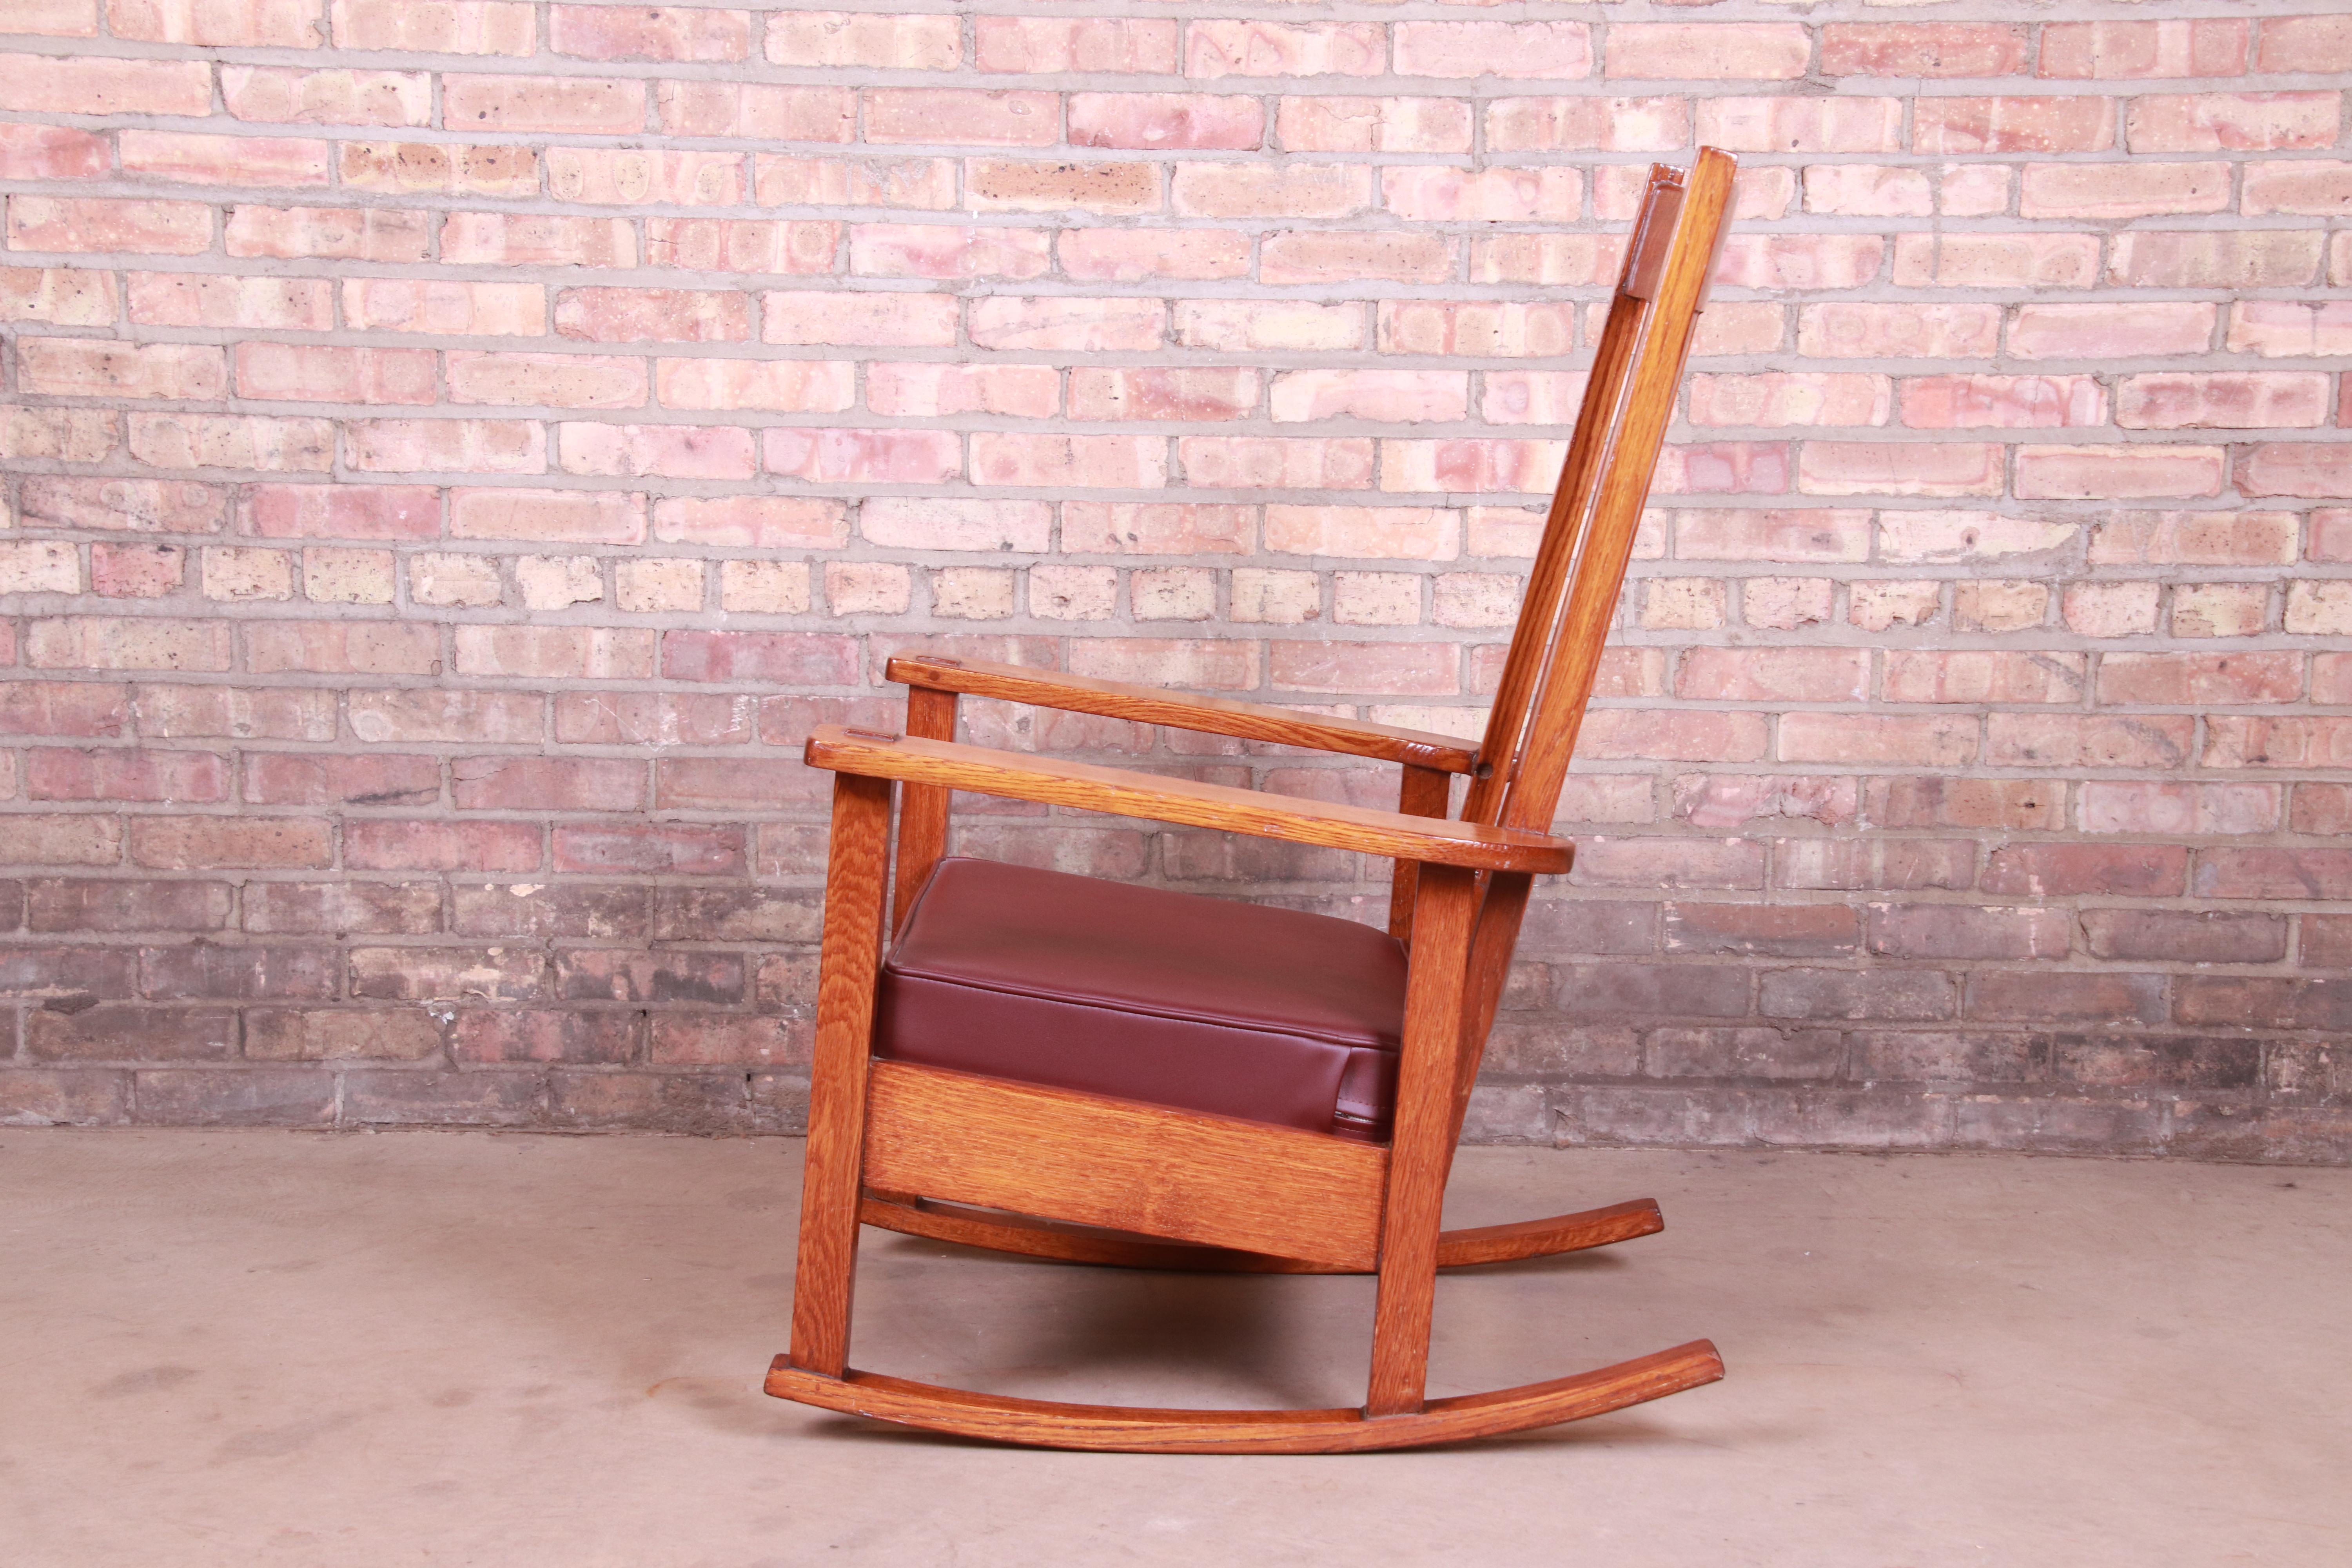 20th Century Stickley Brothers Arts & Crafts Oak and Leather Rocking Chair, circa 1900